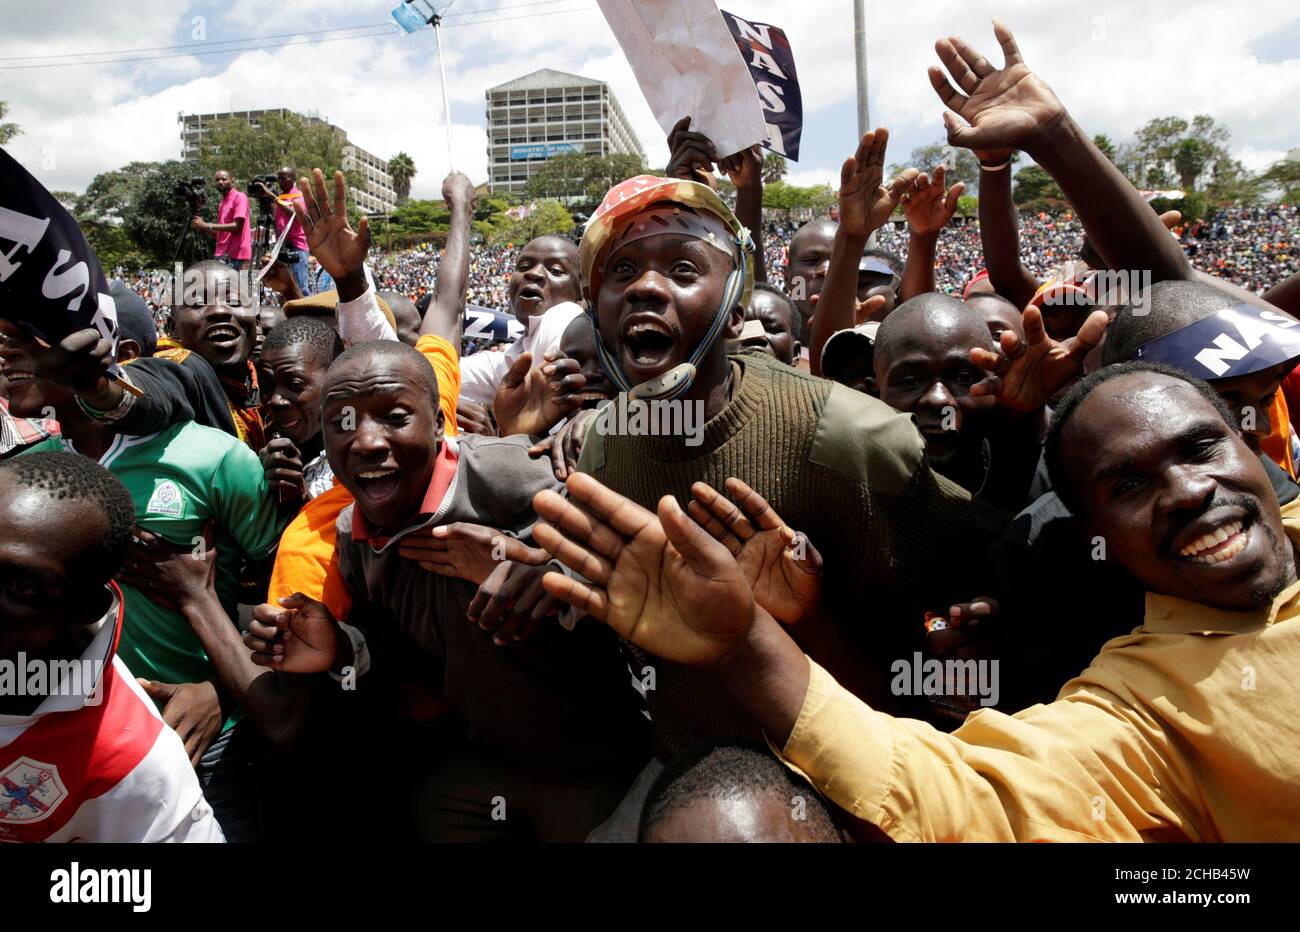 Supporters of Kenyan opposition National Super Alliance (NASA) coalition cheer at a rally endorsing Raila Odinga as the presidential candidate for the 2017 general elections at the Uhuru Park grounds, in Nairobi, Kenya, April 27, 2017. REUTERS/Thomas Mukoya     TPX IMAGES OF THE DAY Stock Photo